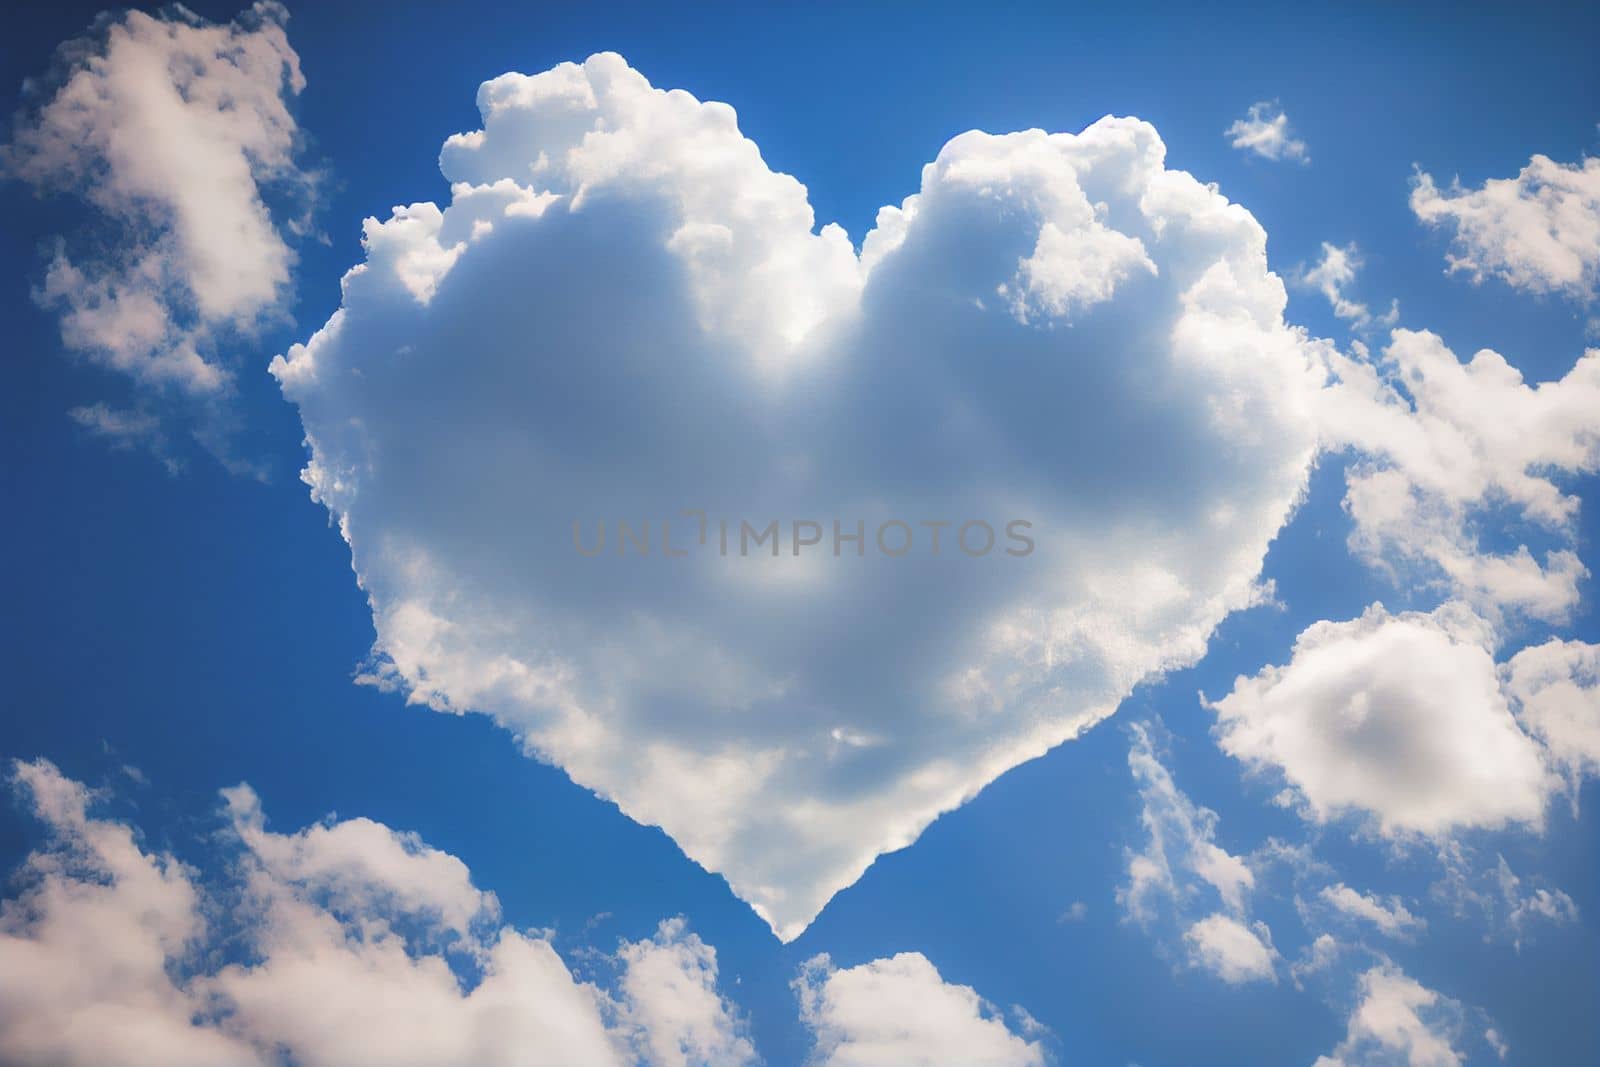 Heart shaped cloud on bright blue sky and white clouds by FokasuArt